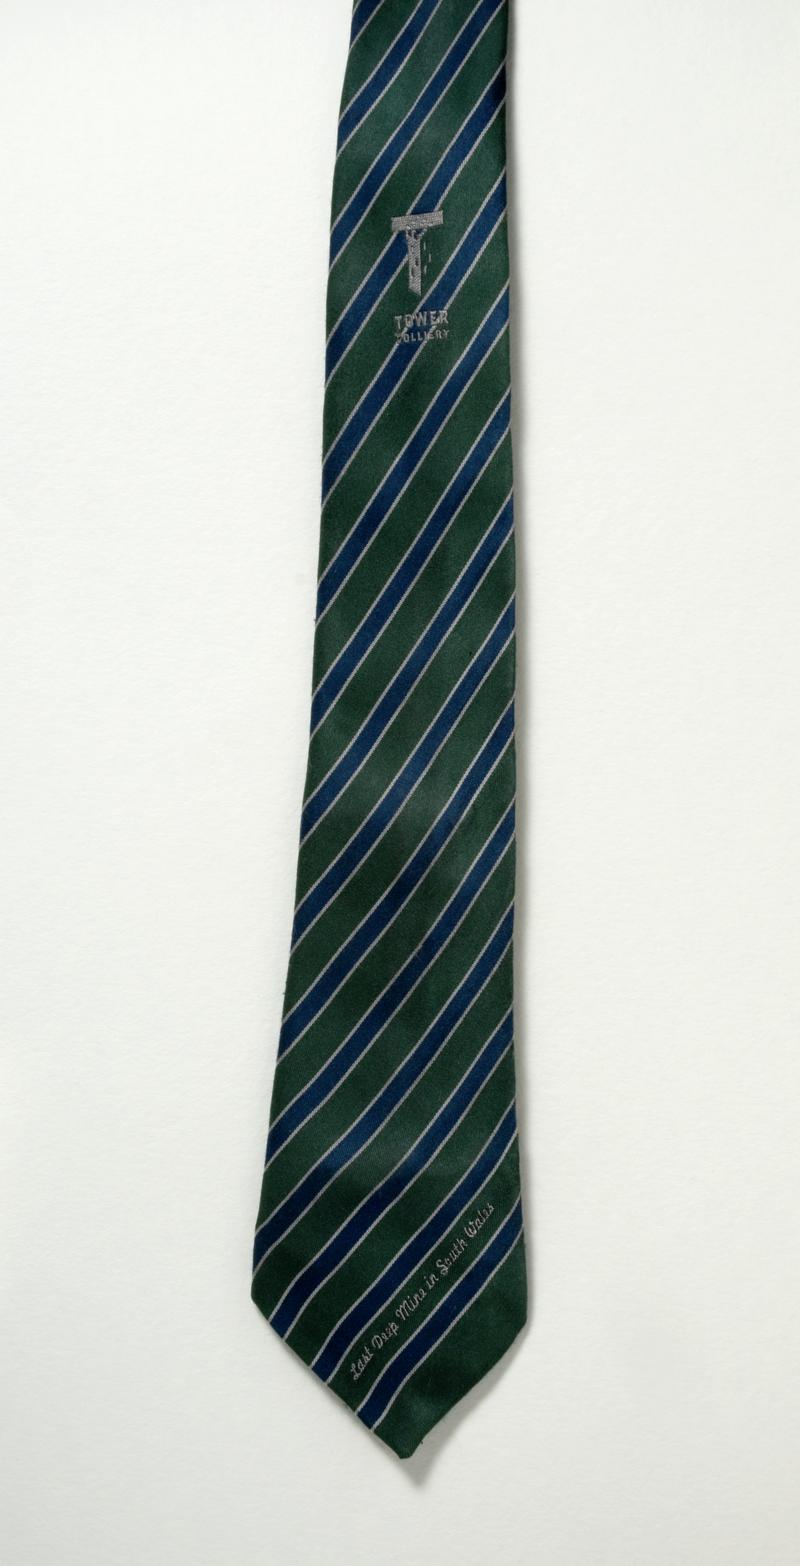 Tower Colliery commemorative tie